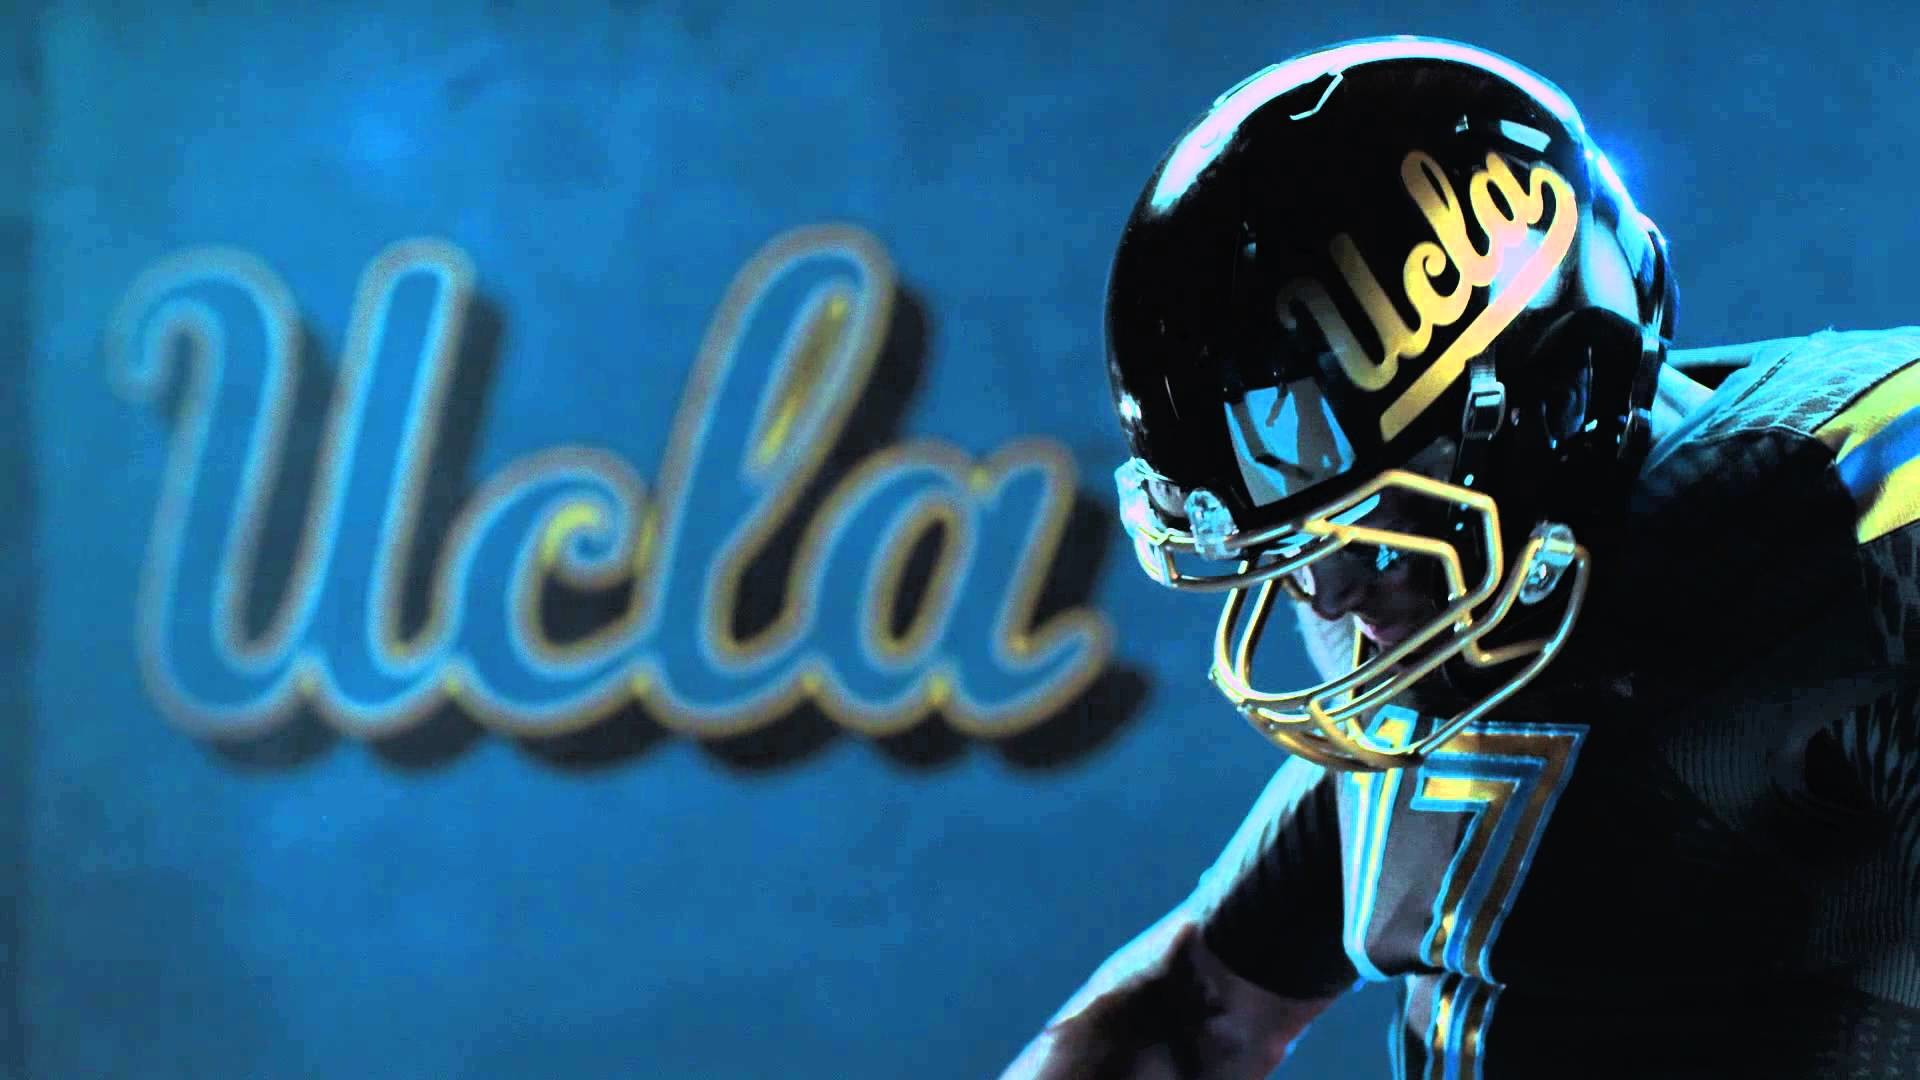 Download Picturing Campus Life at the Prestigious UCLA Wallpaper   Wallpaperscom